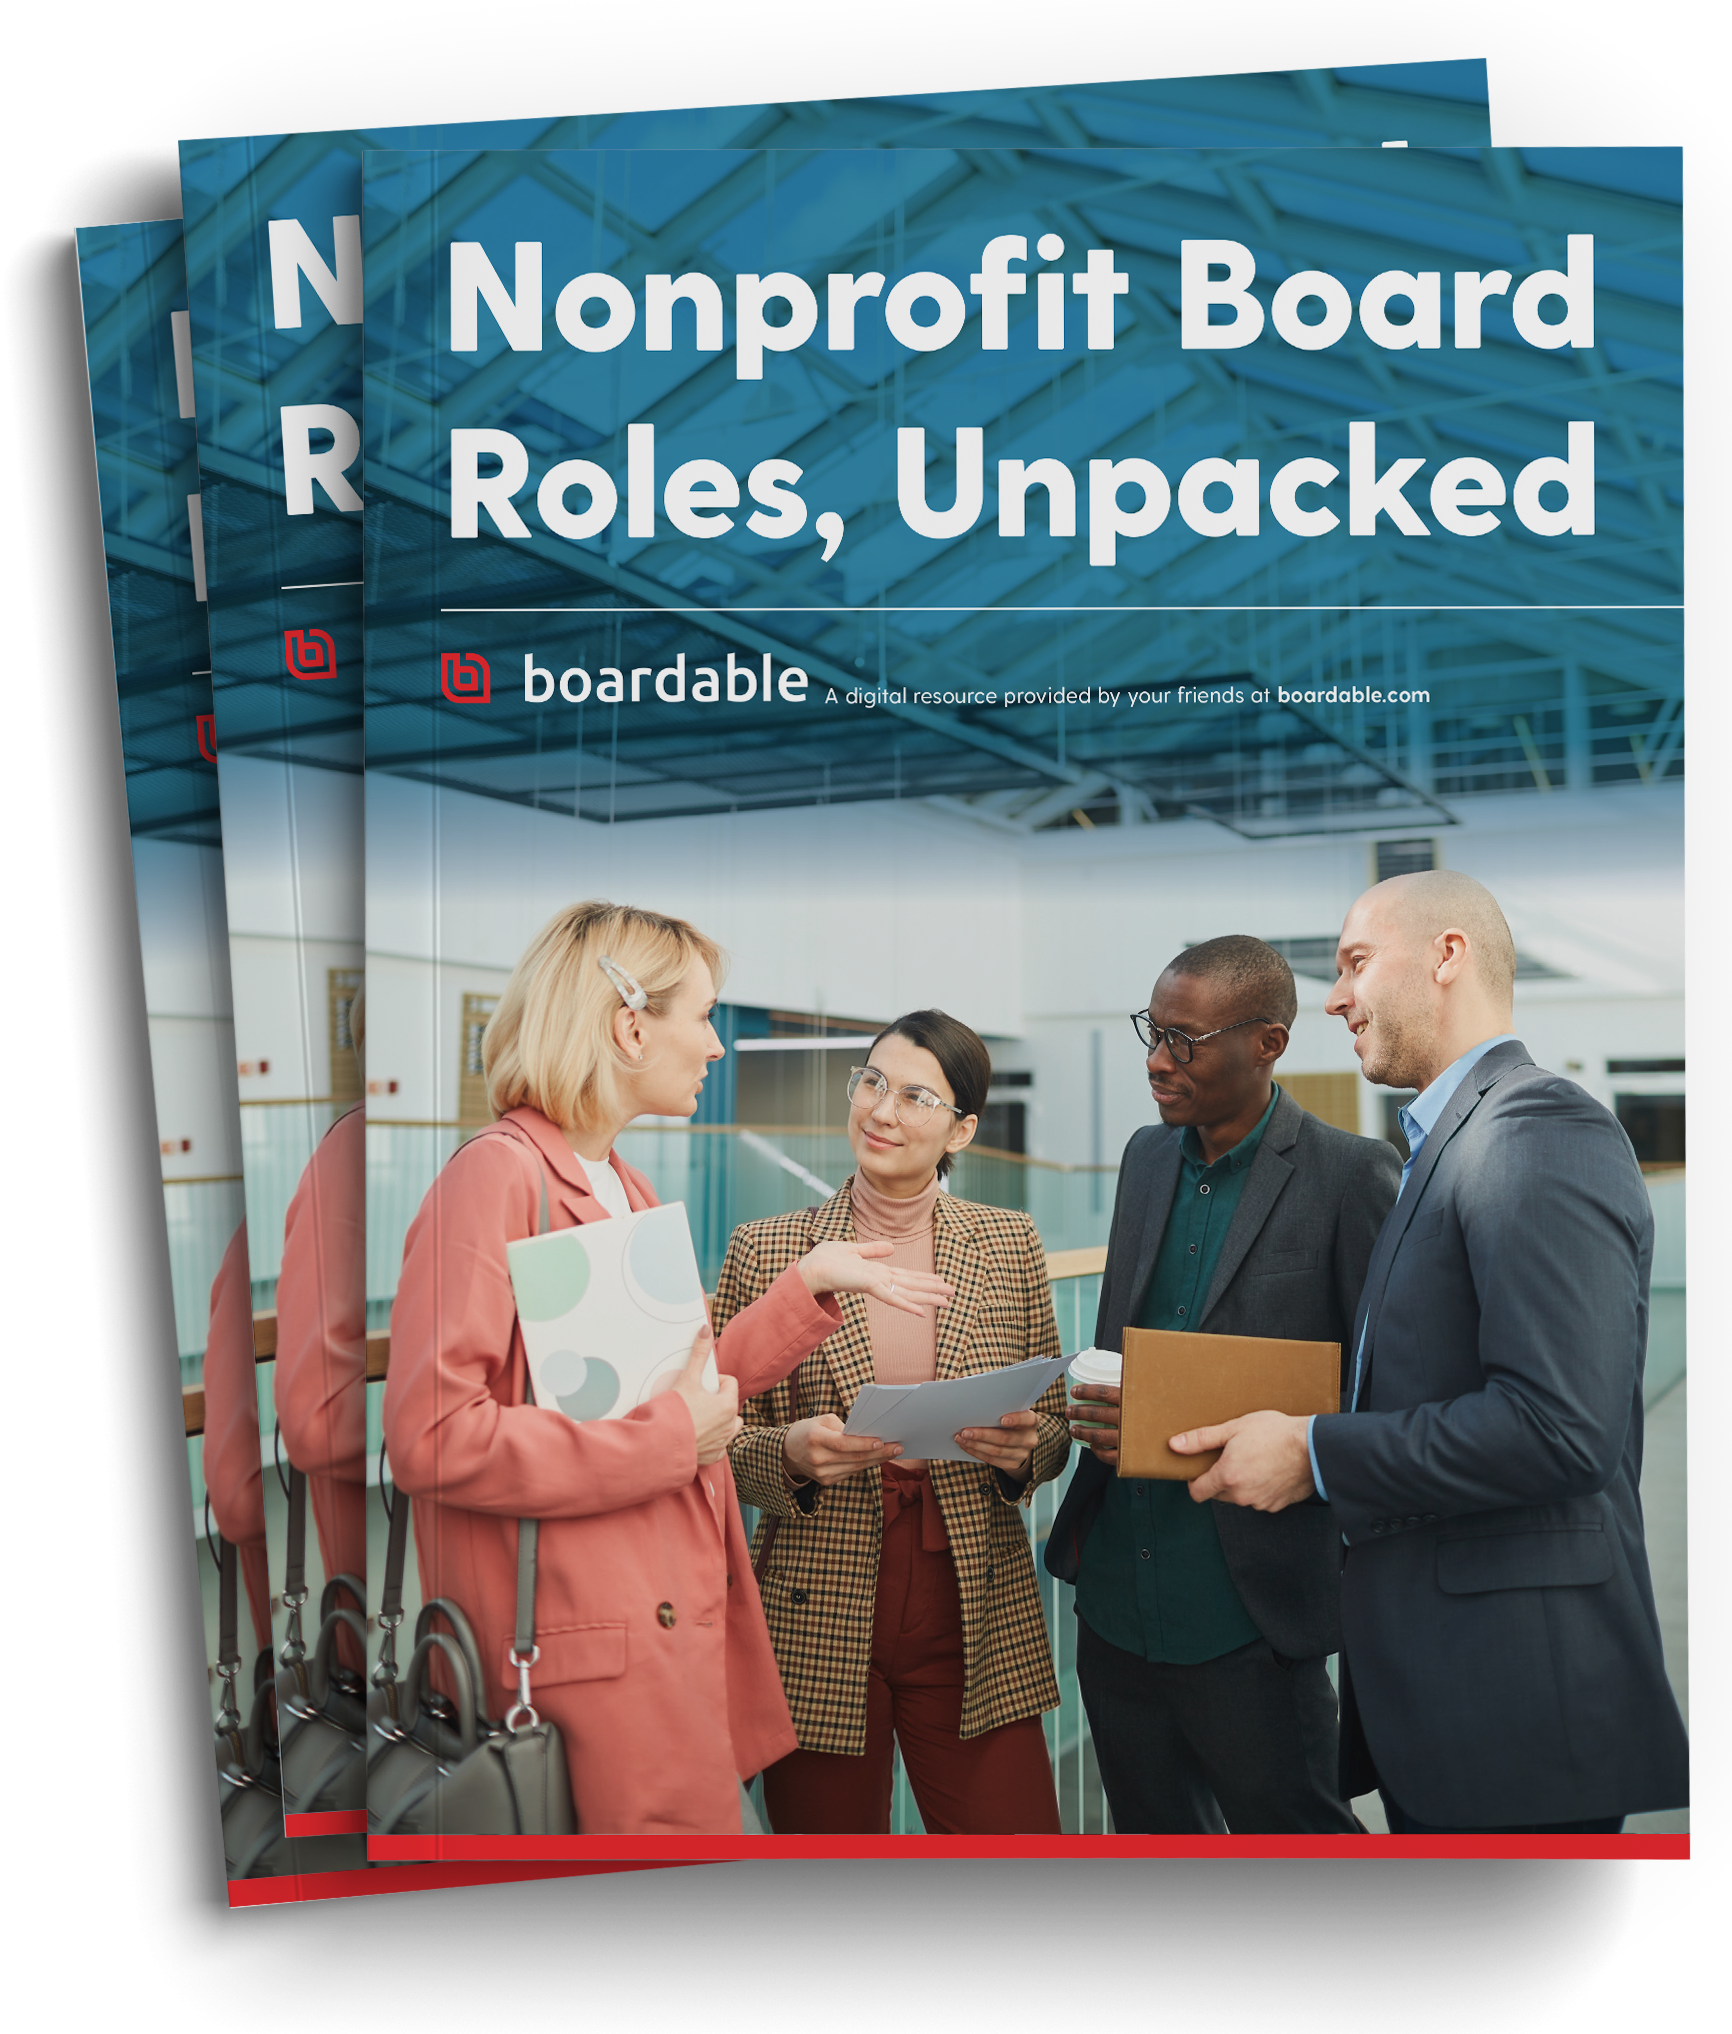 Download the “Nonprofit Board Roles, Unpacked” Ebook.